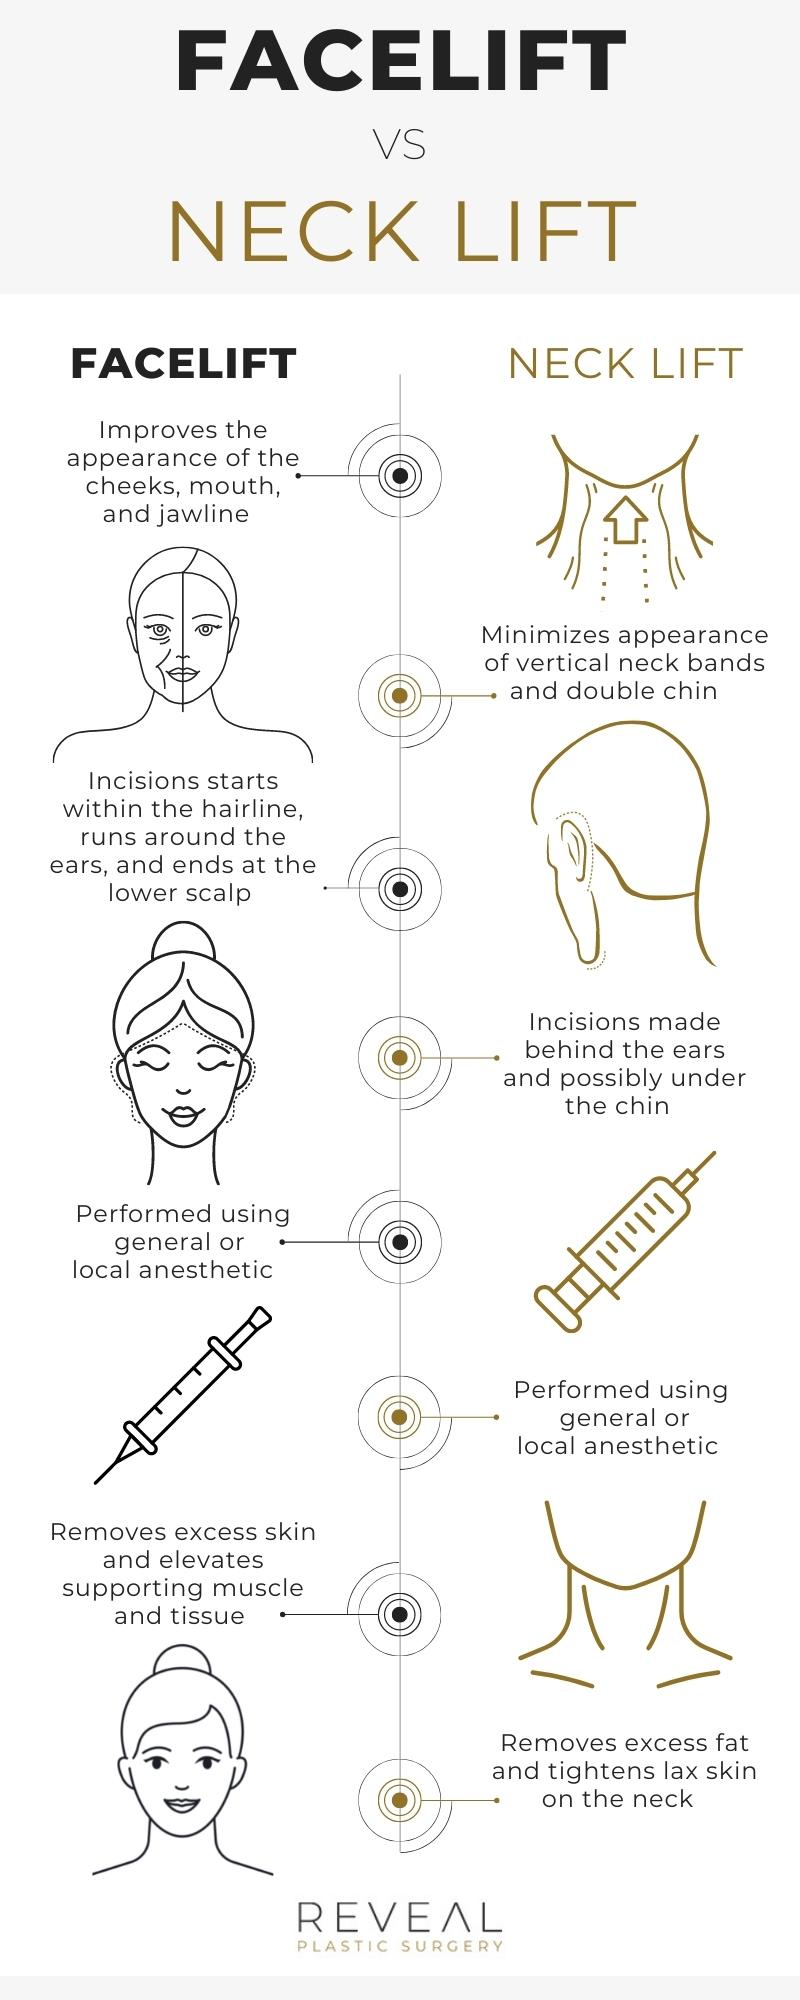  Infographic showcasing the different areas of the face addressed with facelift and neck lift procedures.